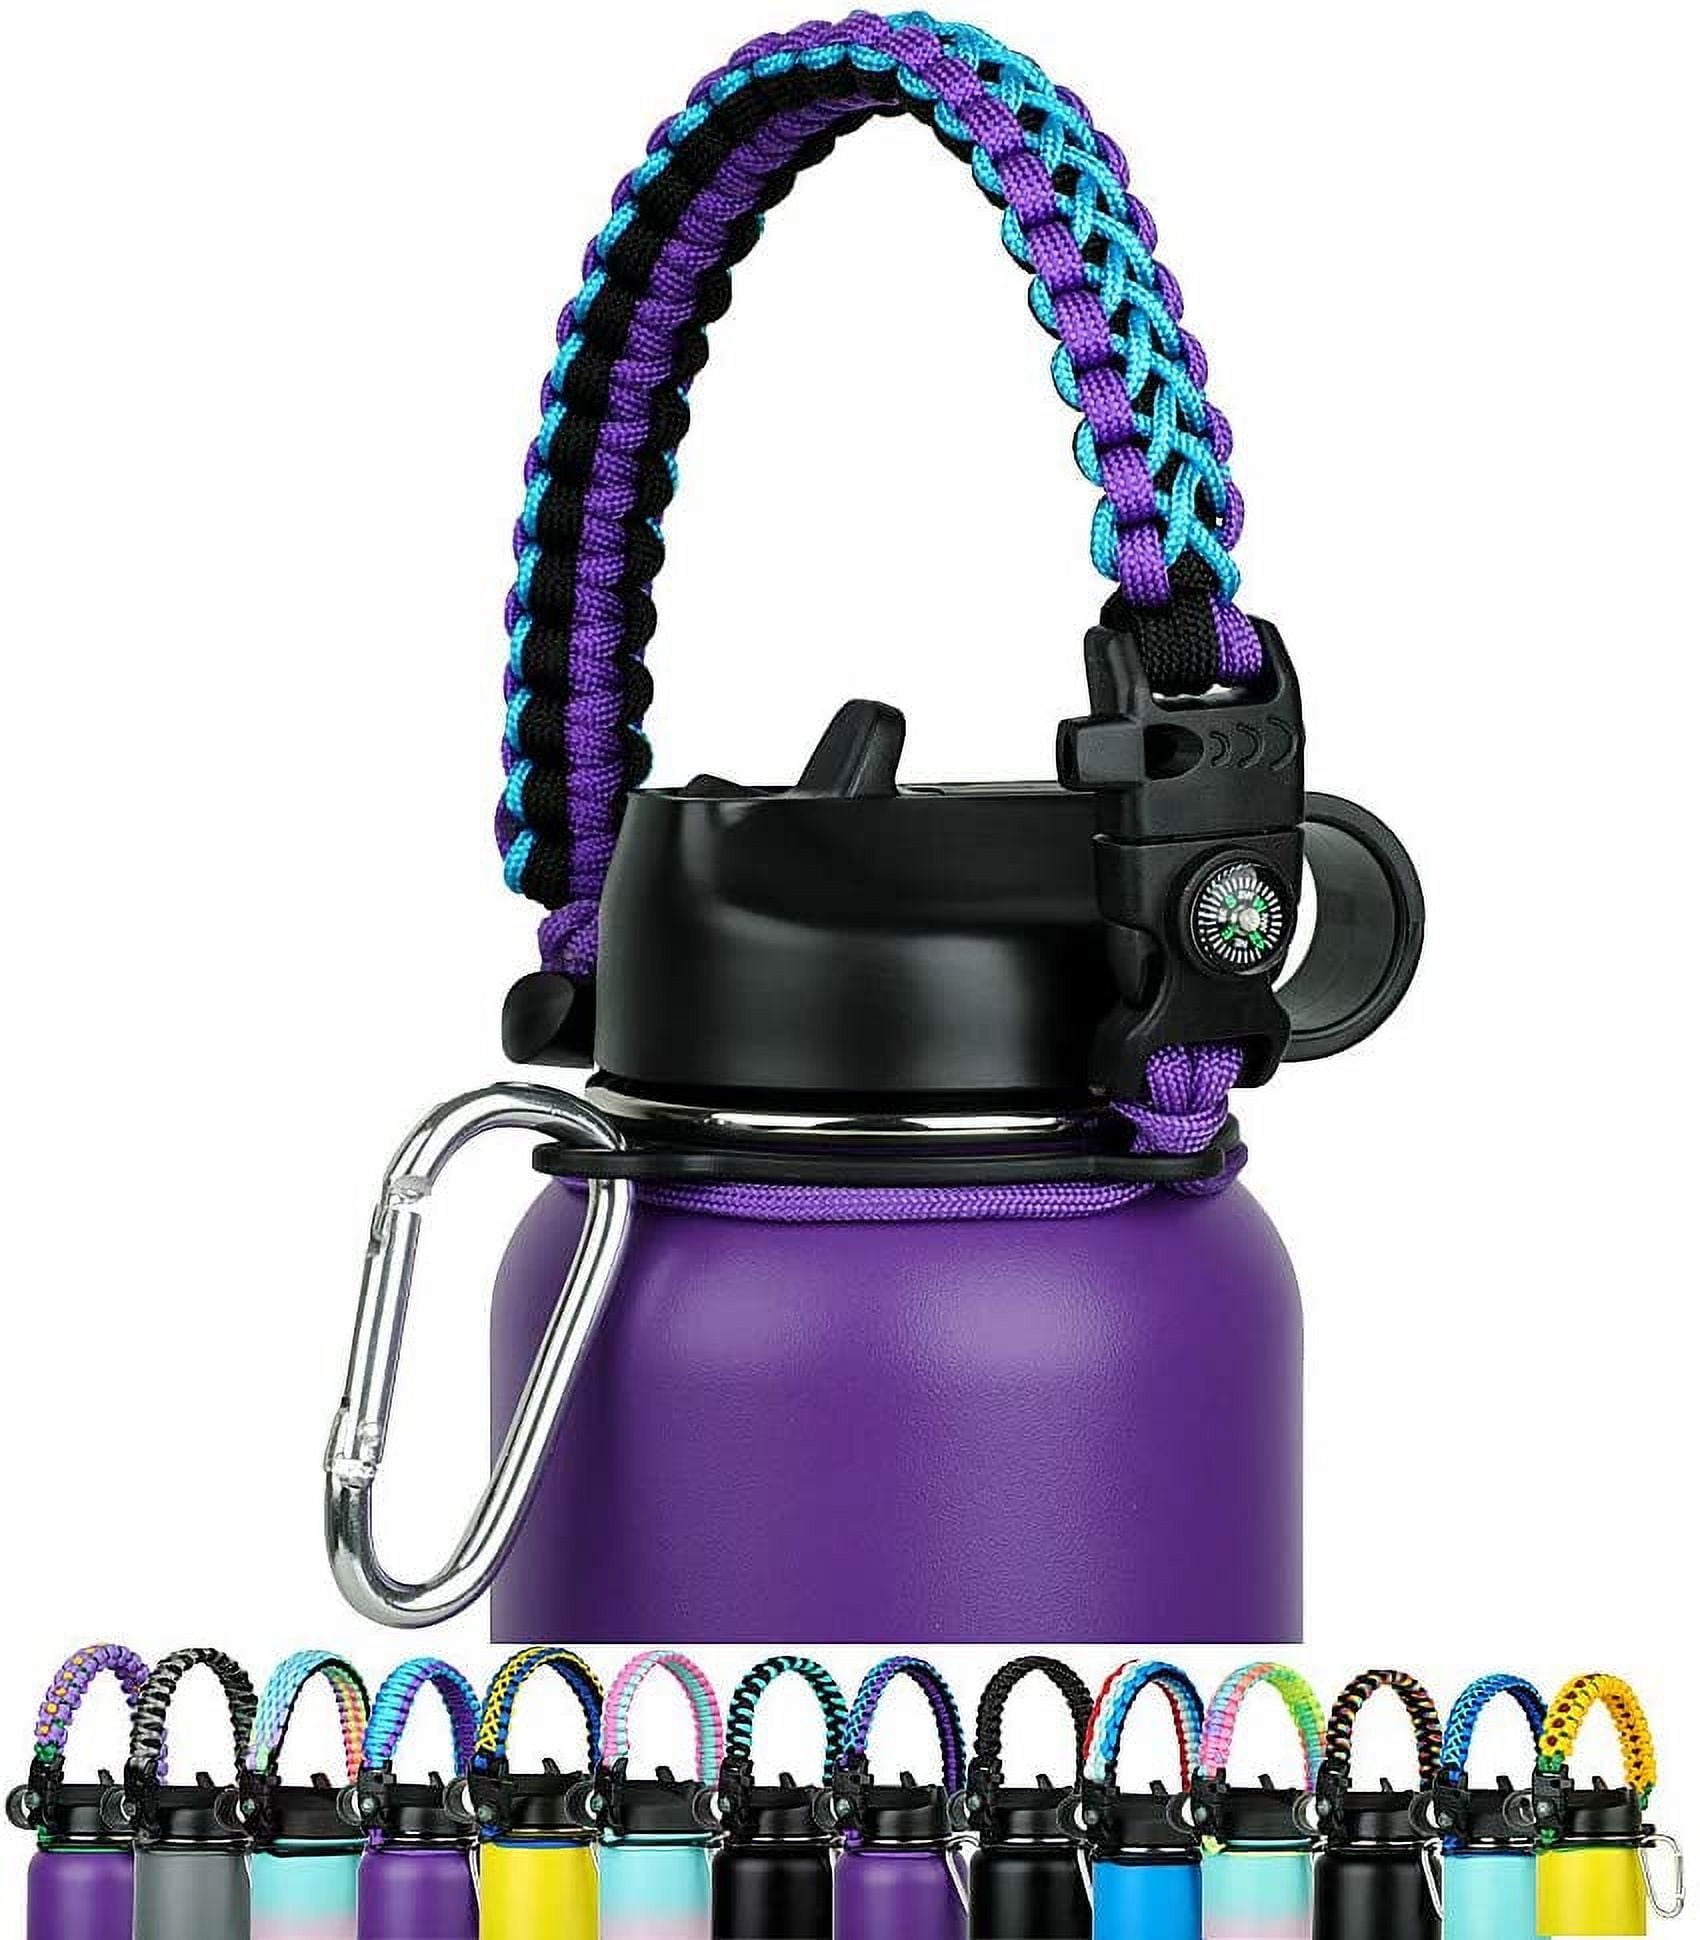 Water Bottle Holder 1 Size Fits All, Bailey Wide Mouth /standard Adjustable  Pull-tite Cord Lock With Carabineer and Key-ring Made in USA. 